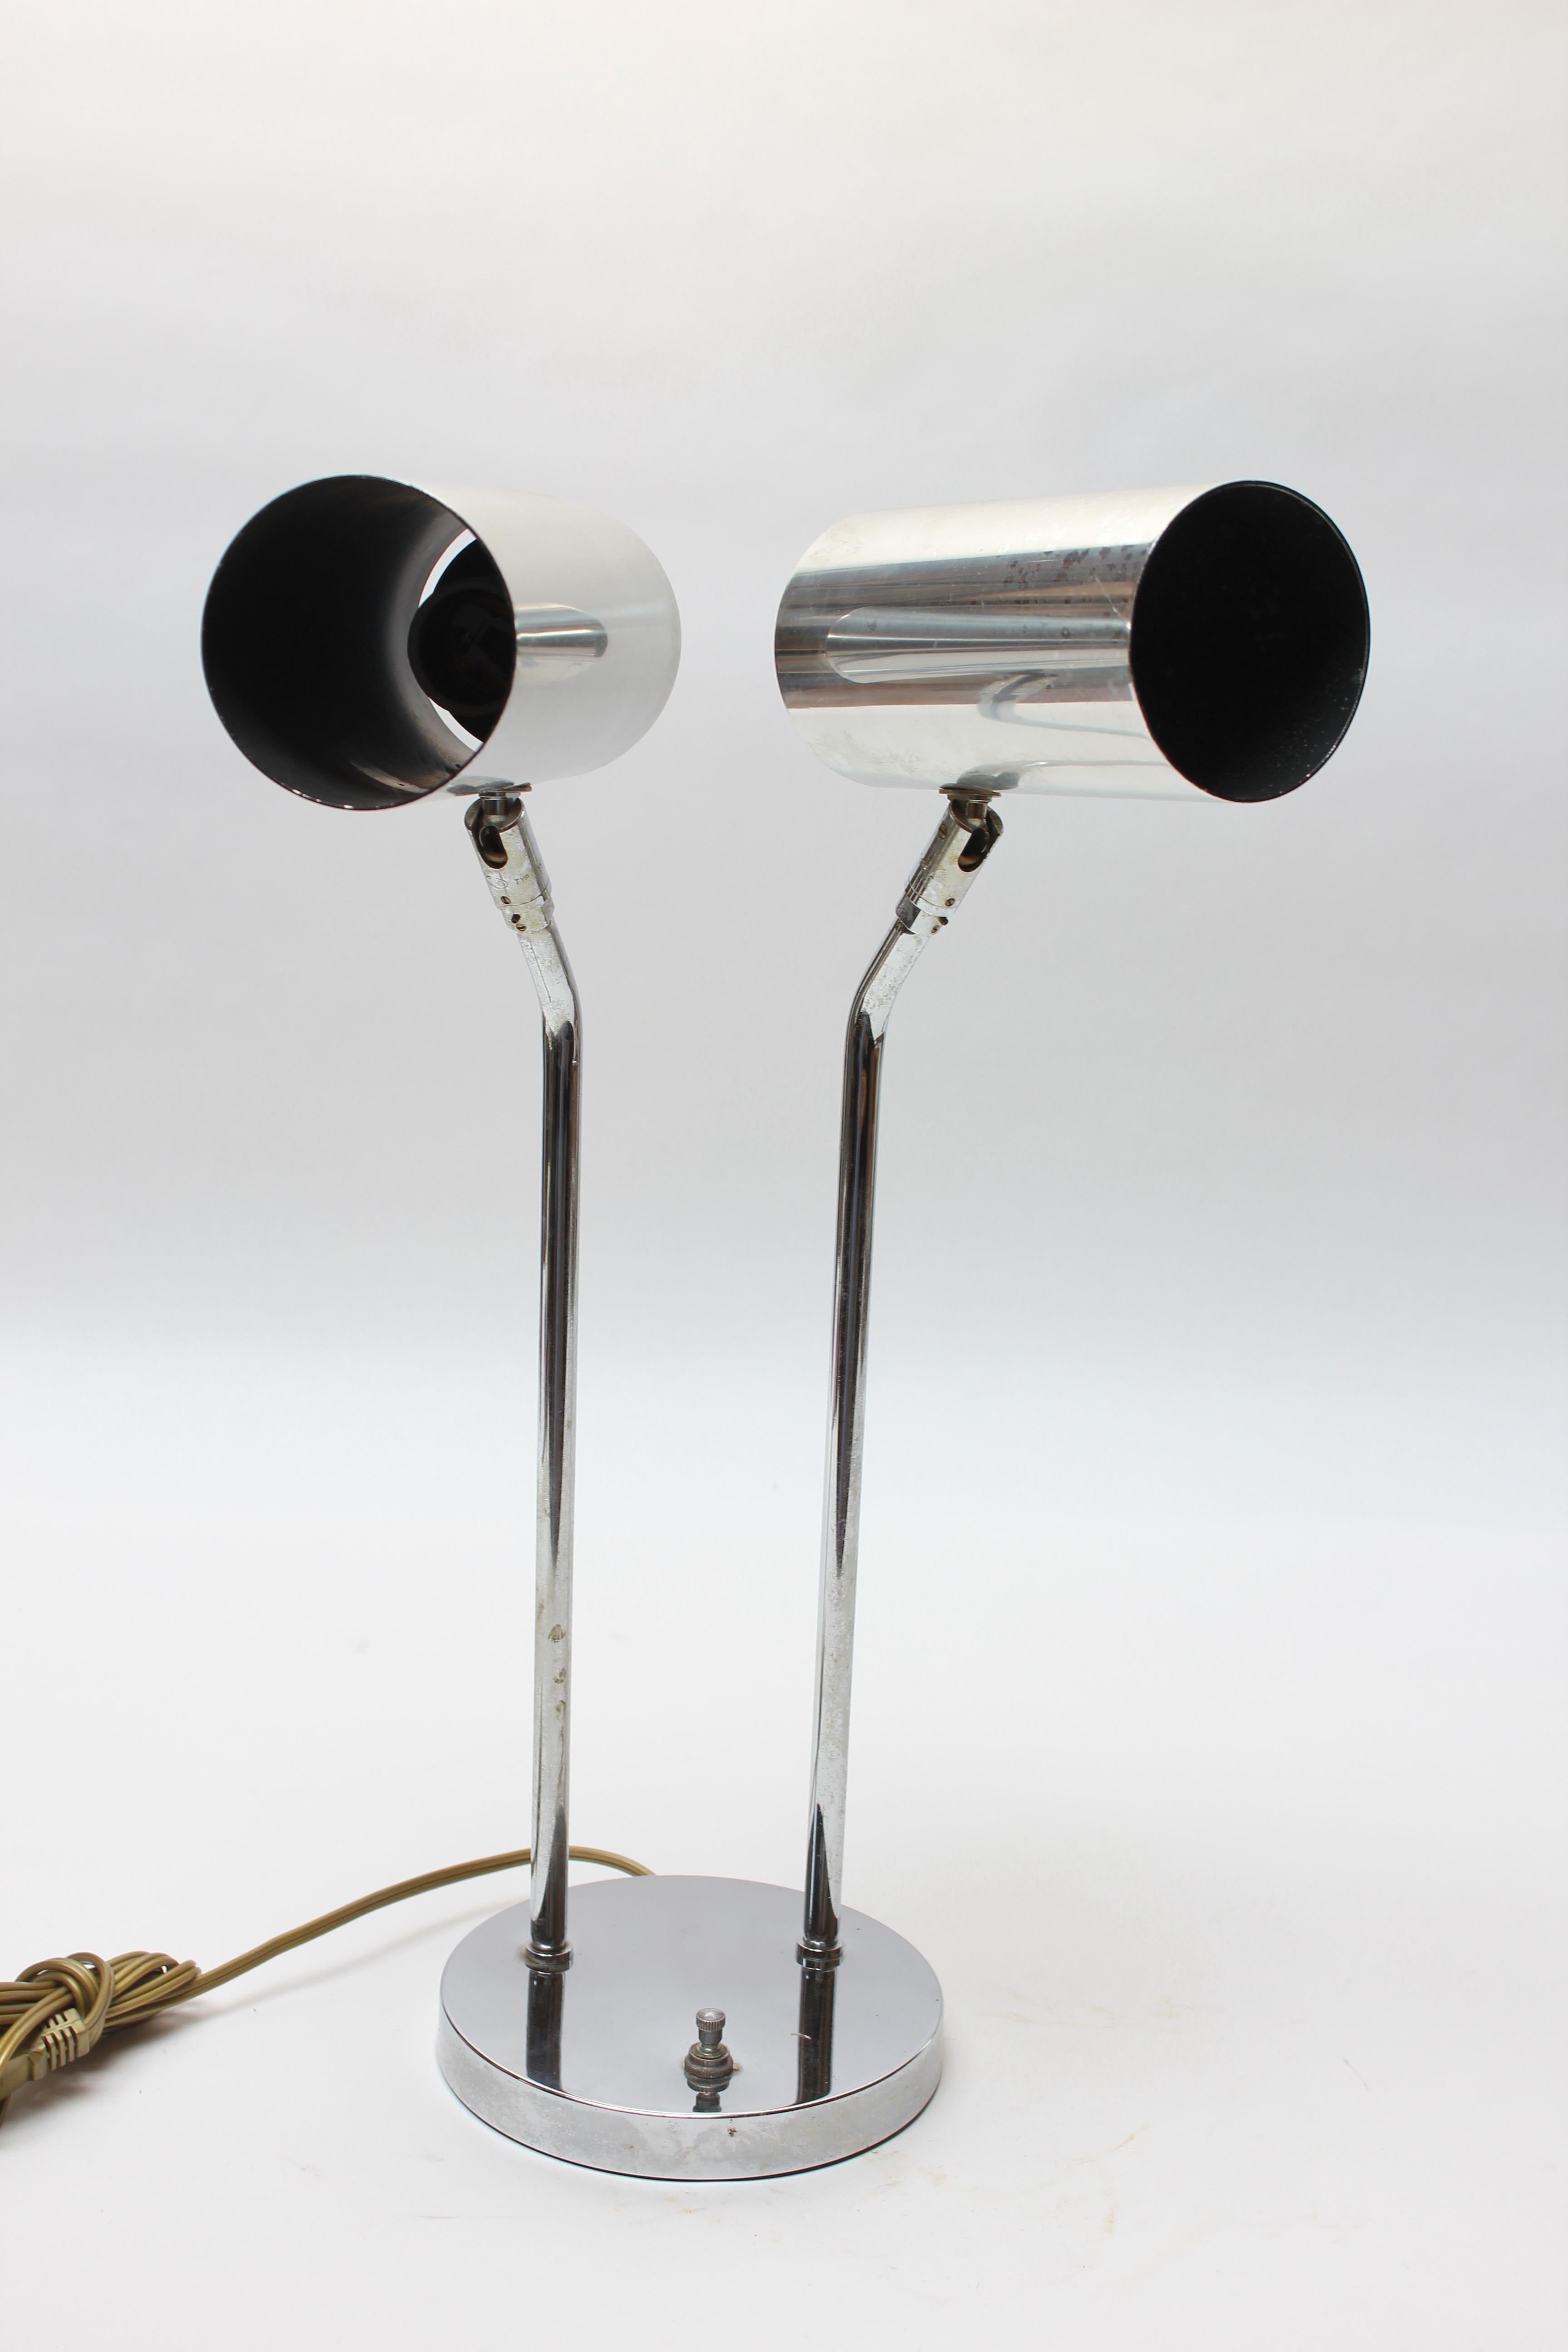 Vintage Double-Fixture Adjustable Chrome Table Lamp by Robert Sonneman In Good Condition For Sale In Brooklyn, NY